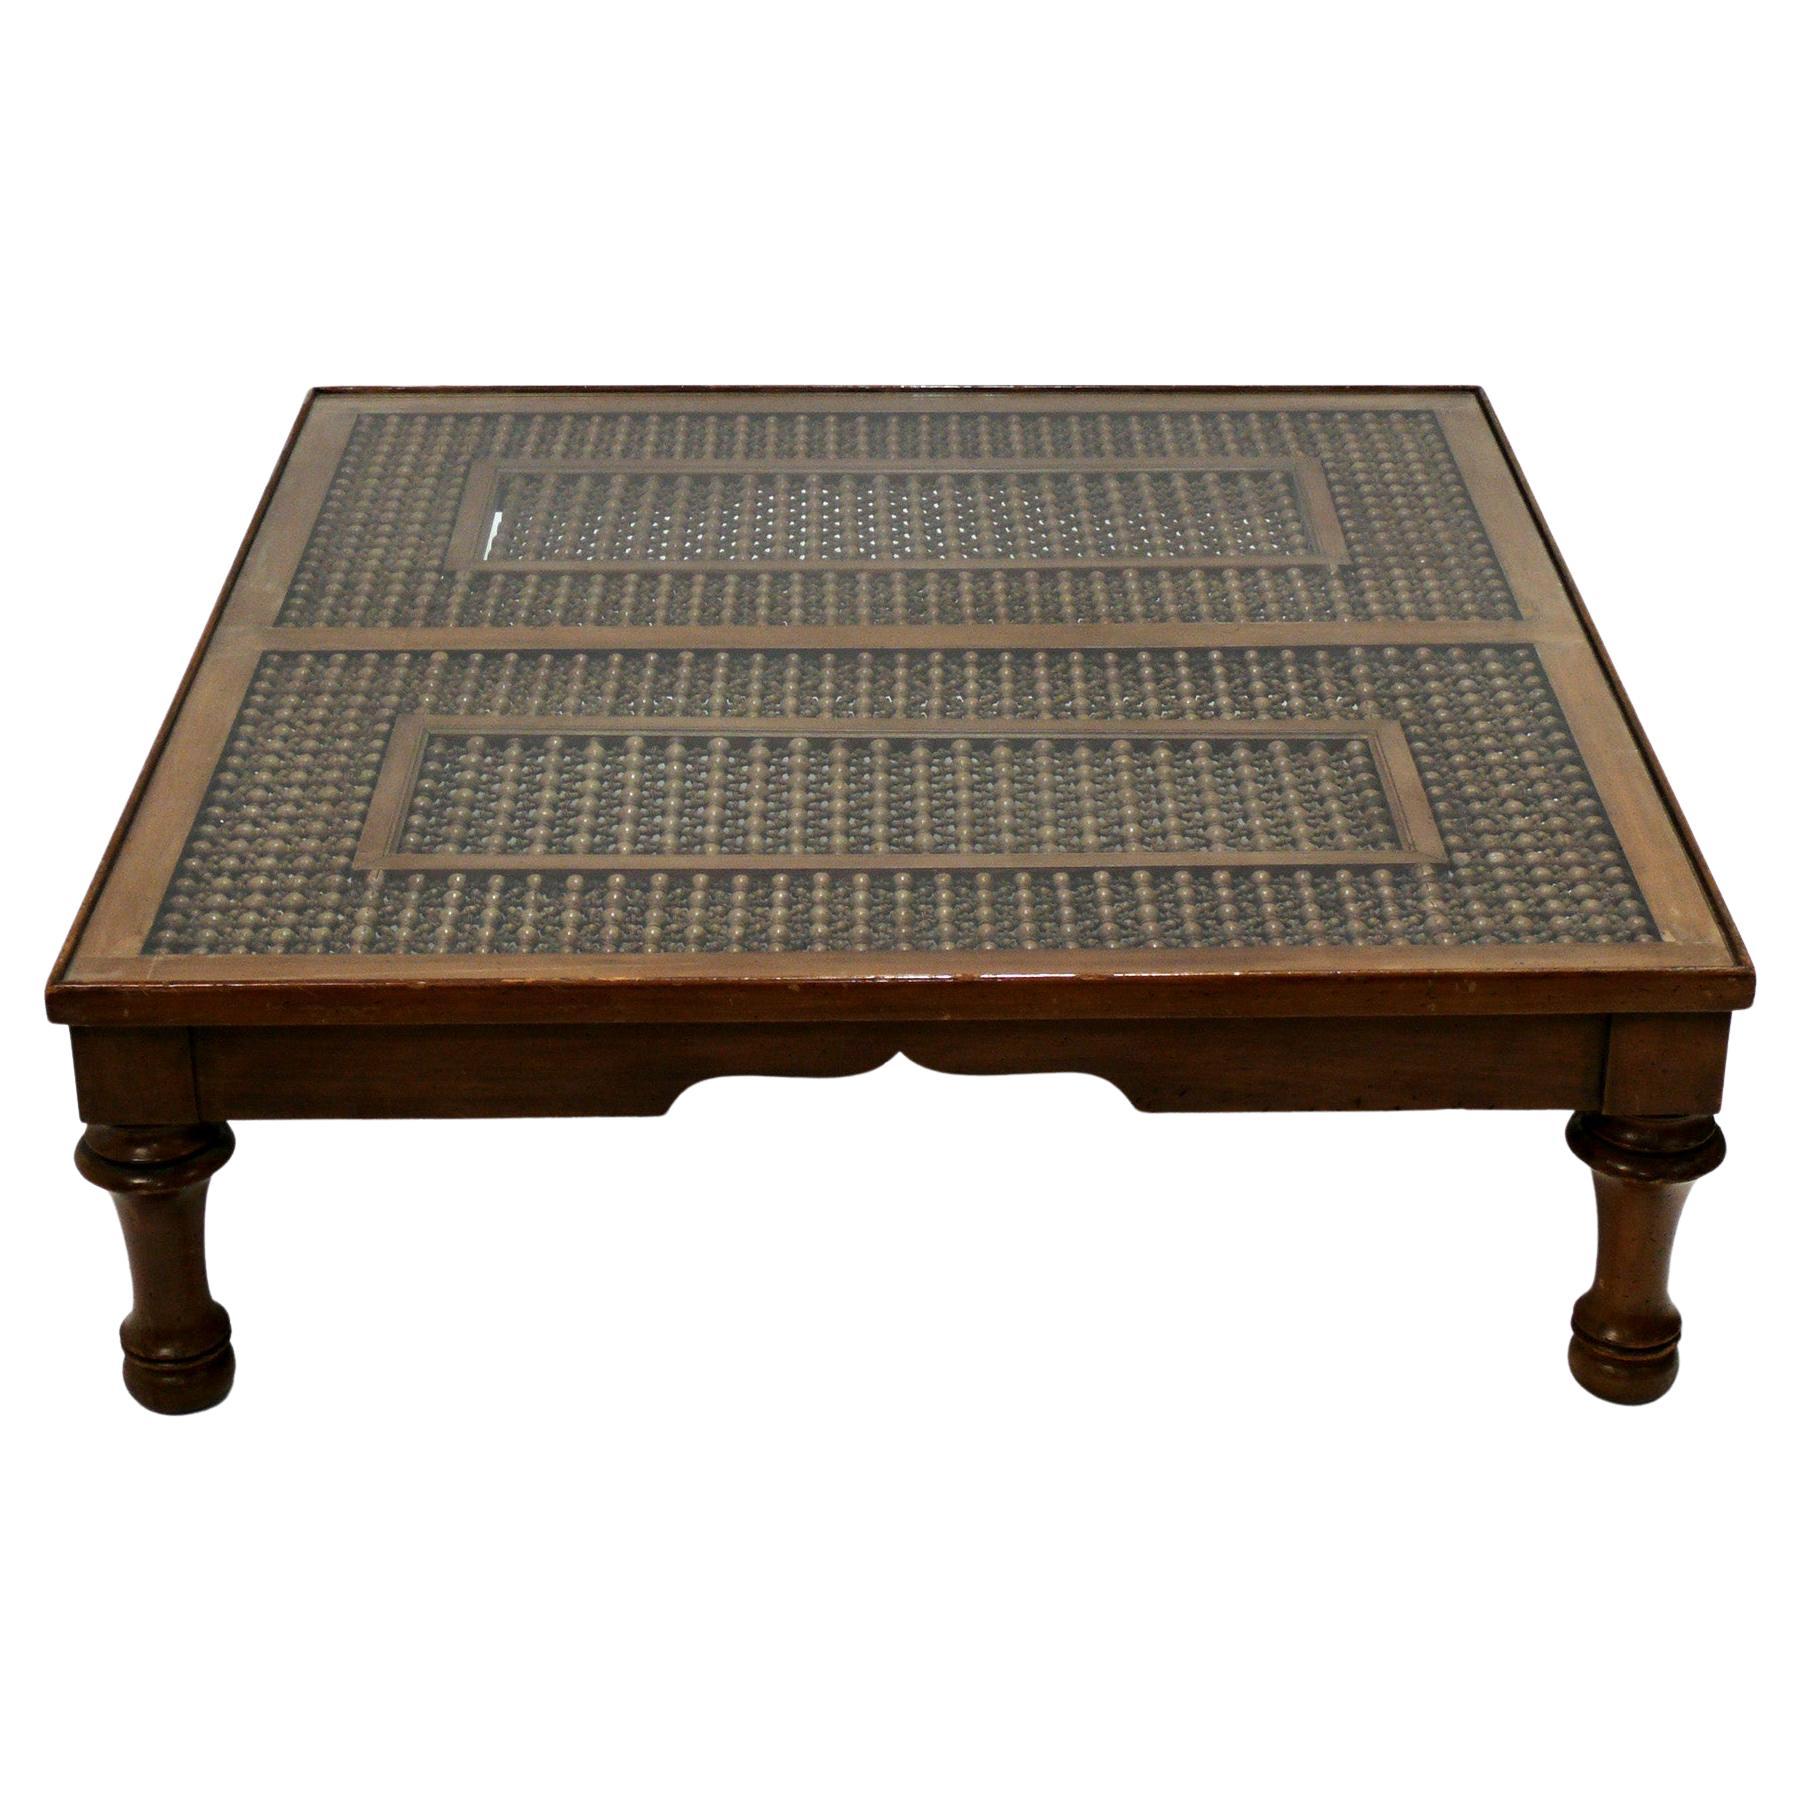 https://a.1stdibscdn.com/indo-chinese-coffee-table-large-scale-architectural-element-for-sale/f_8718/f_310863321667234006503/f_31086332_1667234007205_bg_processed.jpg